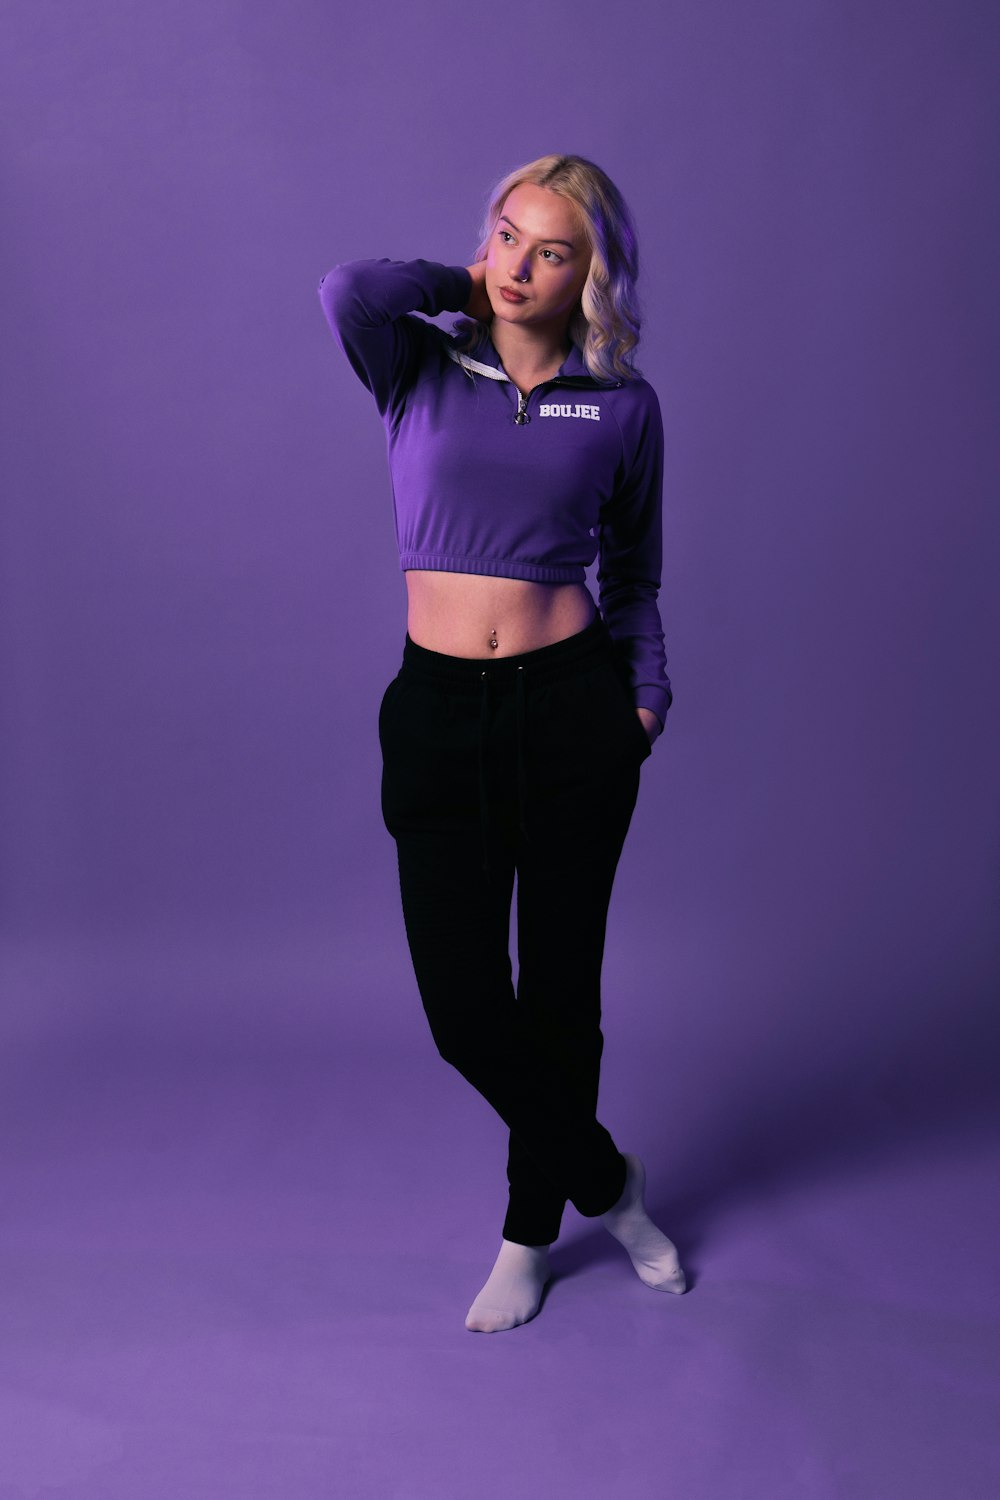 a woman in a purple shirt and black pants